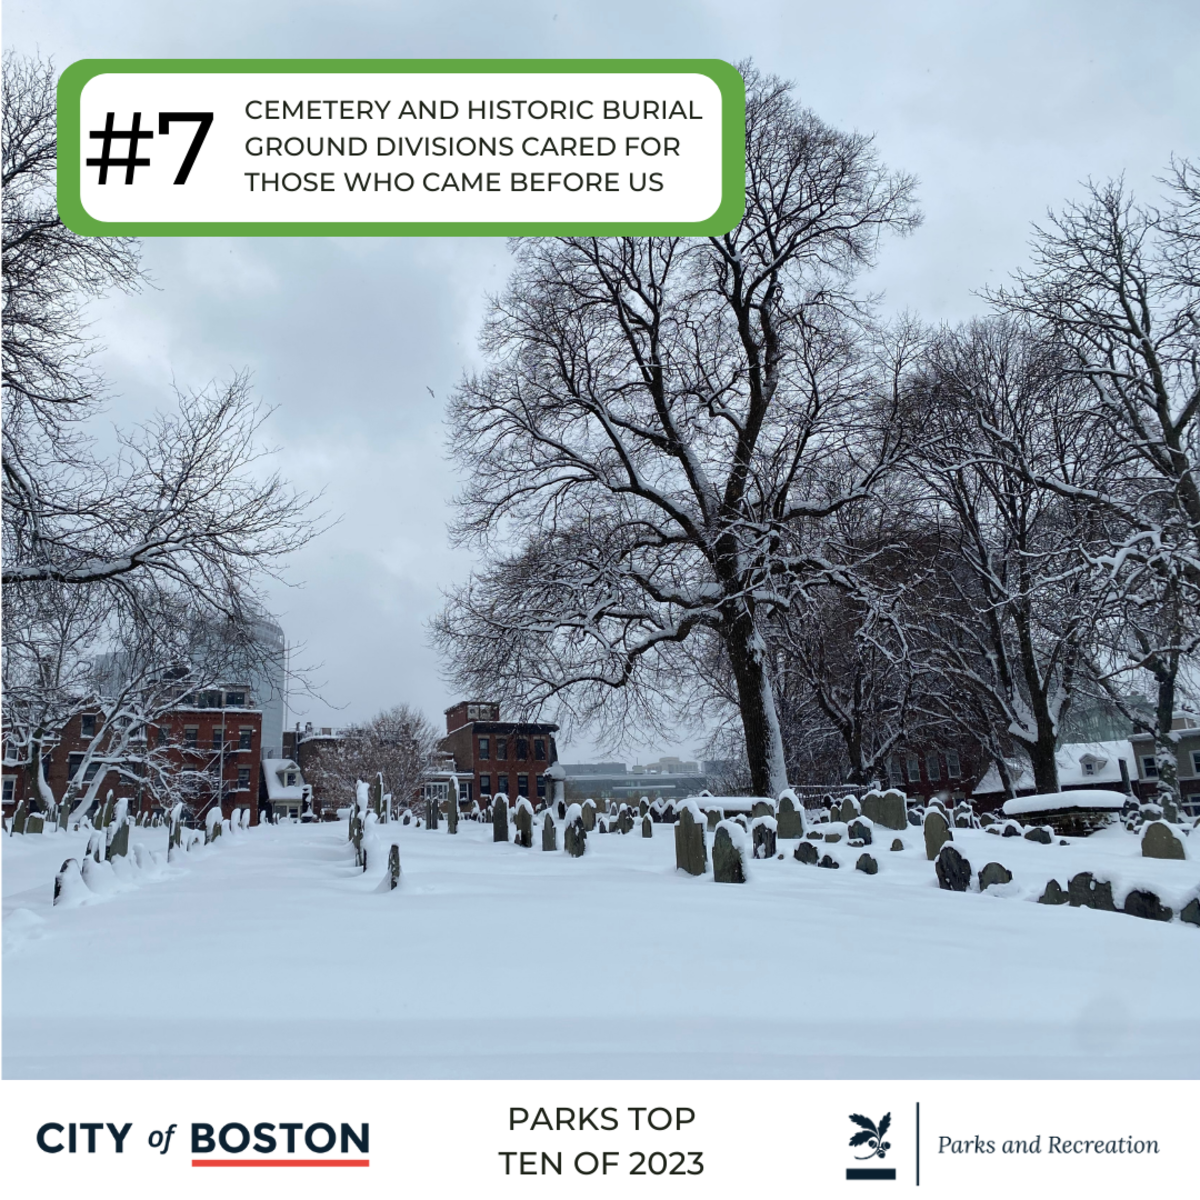 7. CEMETERY AND HISTORIC BURIAL GROUNDS DIVISIONS CARED FOR THOSE WHO CAME BEFORE US. A snow covered winter burial ground scene.